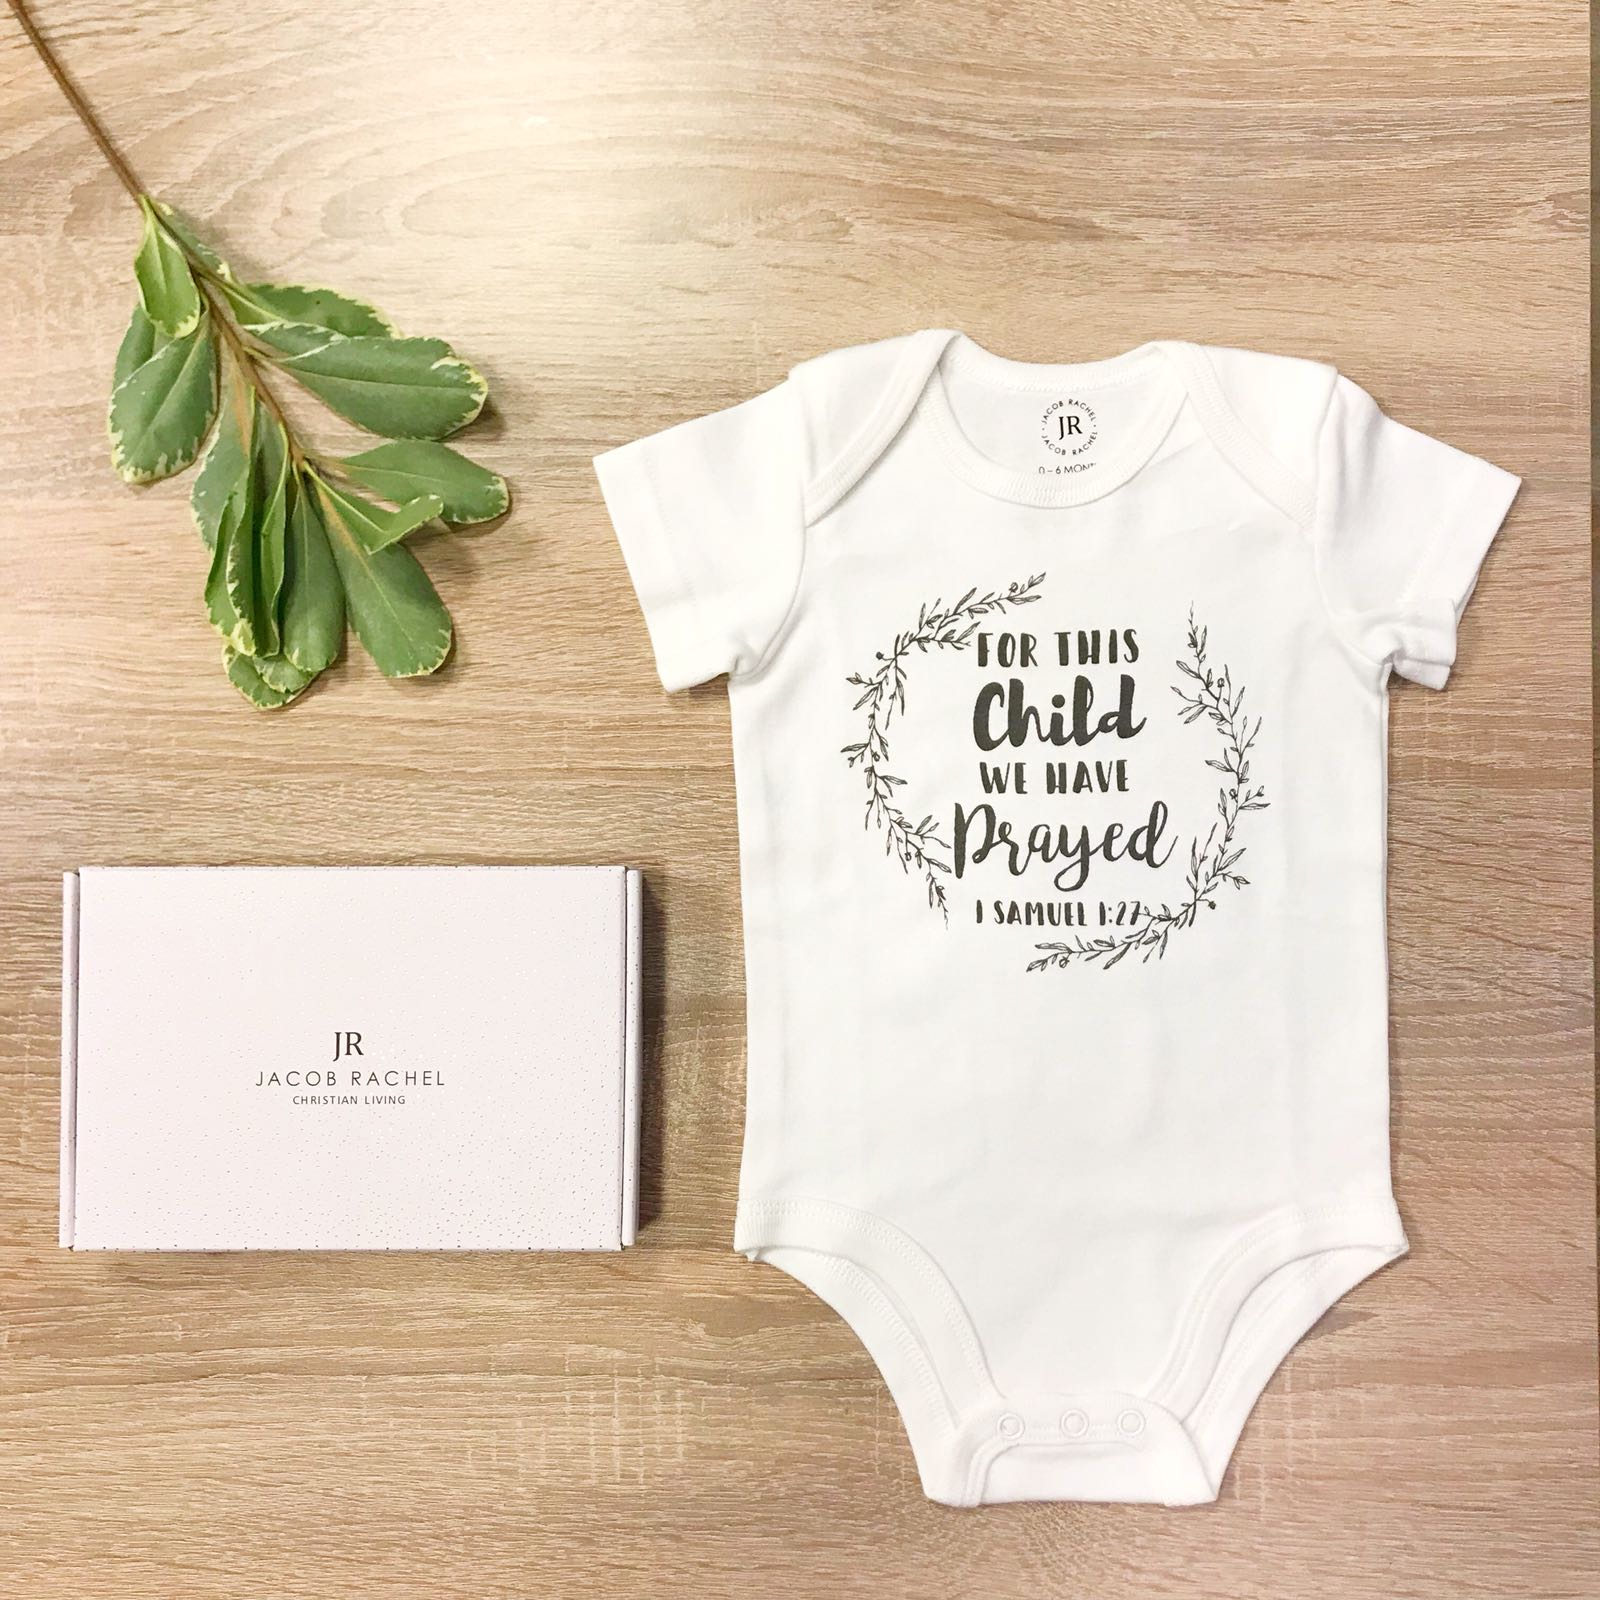 ROCKONLINE | New Creation Church | NCC | Joseph Prince | ROCK Bookshop | ROCK Bookstore | Star Vista | Lifestyle | Mothers | Baby Shower | Gift Ideas | Scriptures |Baby Onesie For This Child We Have Prayed by Jacob Rachel | Free delivery for Singapore Orders above $50.